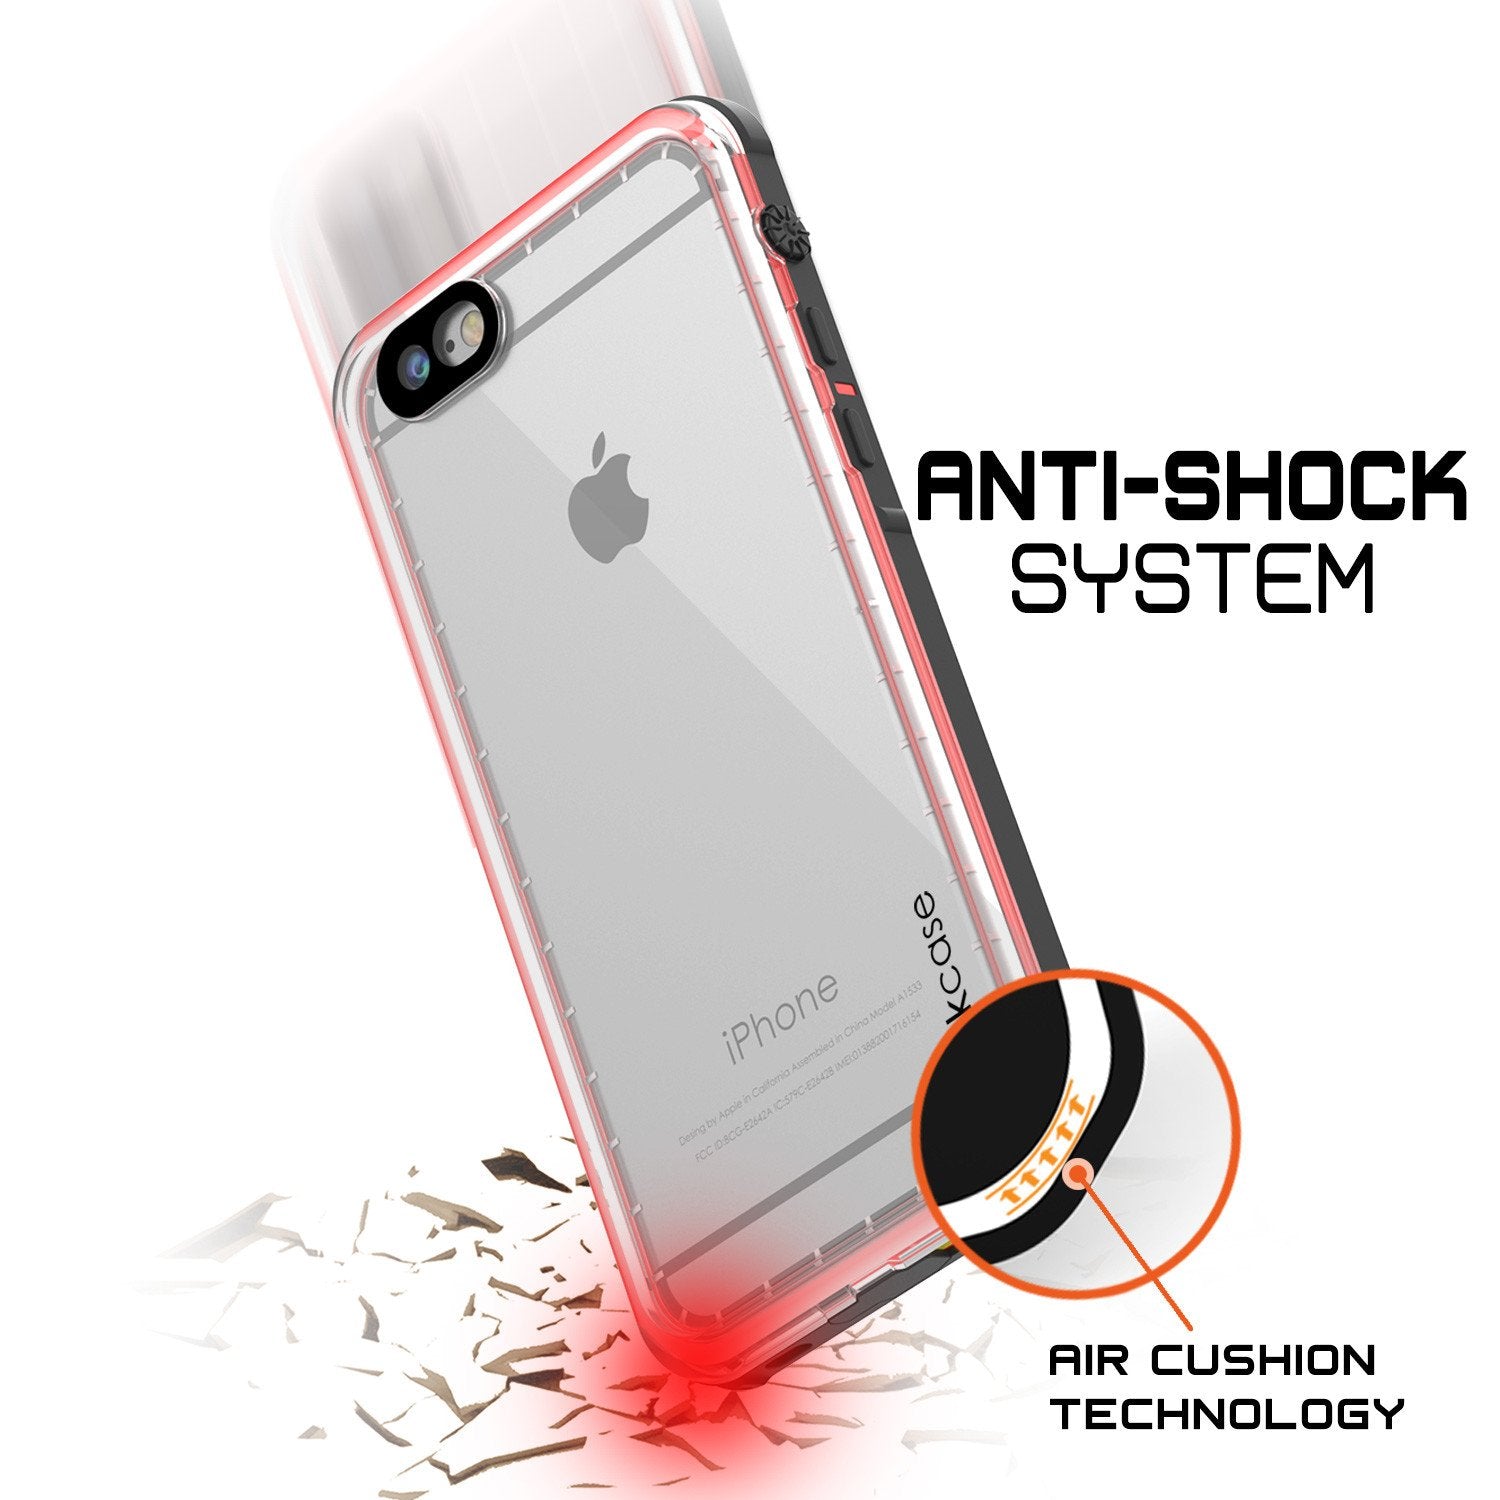 Apple iPhone 7 Waterproof Case, PUNKcase CRYSTAL Red W/ Attached Screen Protector  | Warranty - PunkCase NZ